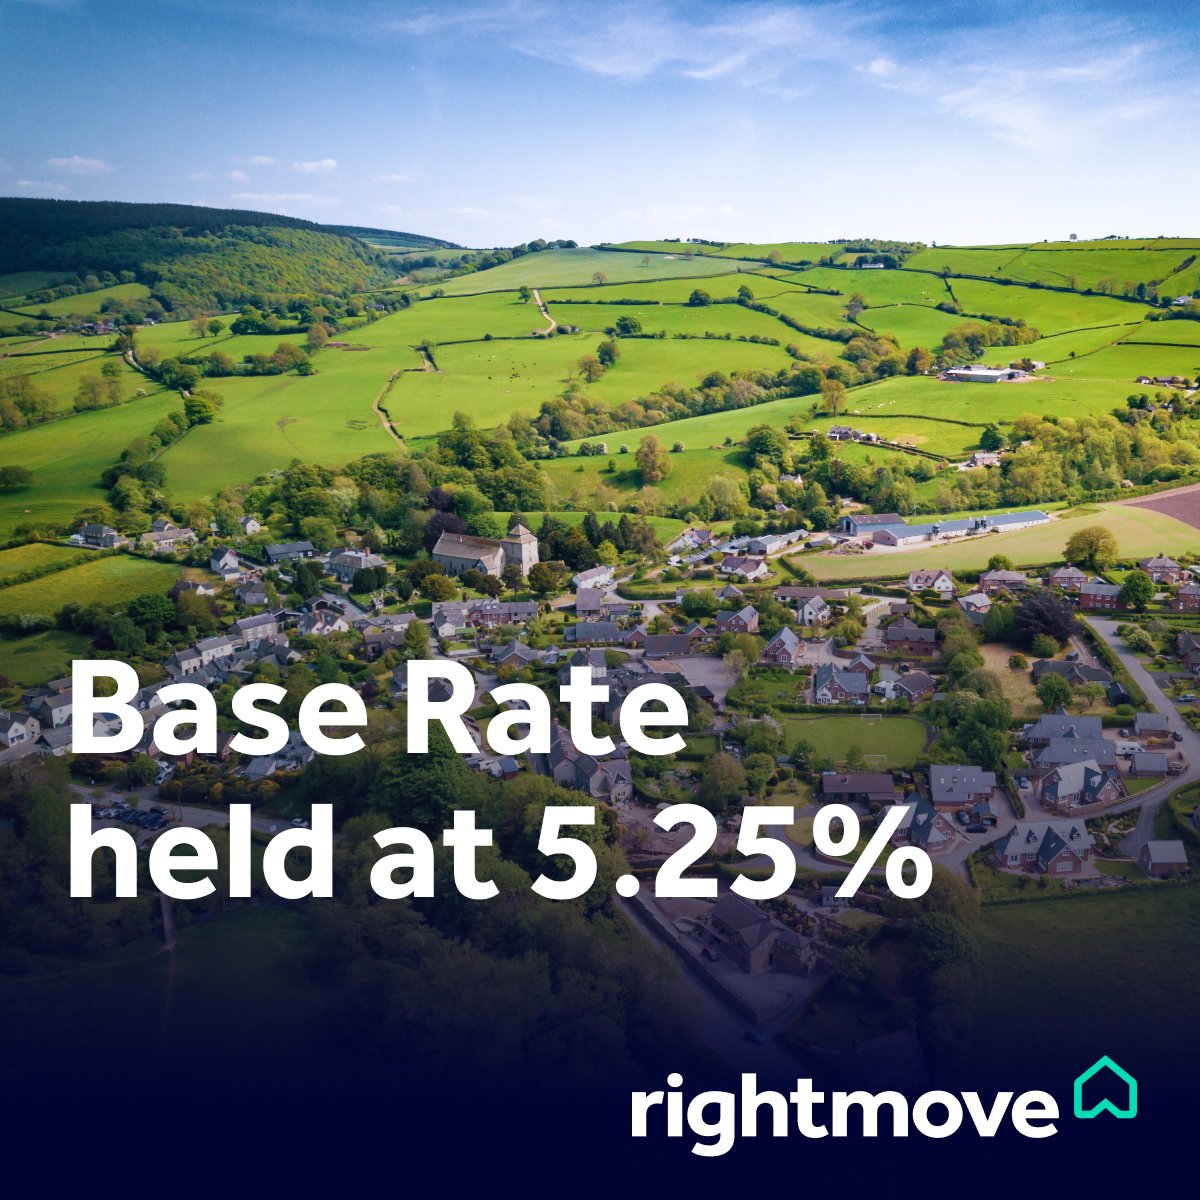 📣 Base Rate Announcement 📣 The Bank of England has held the Base Rate at 5.25% for the 4th consecutive time.